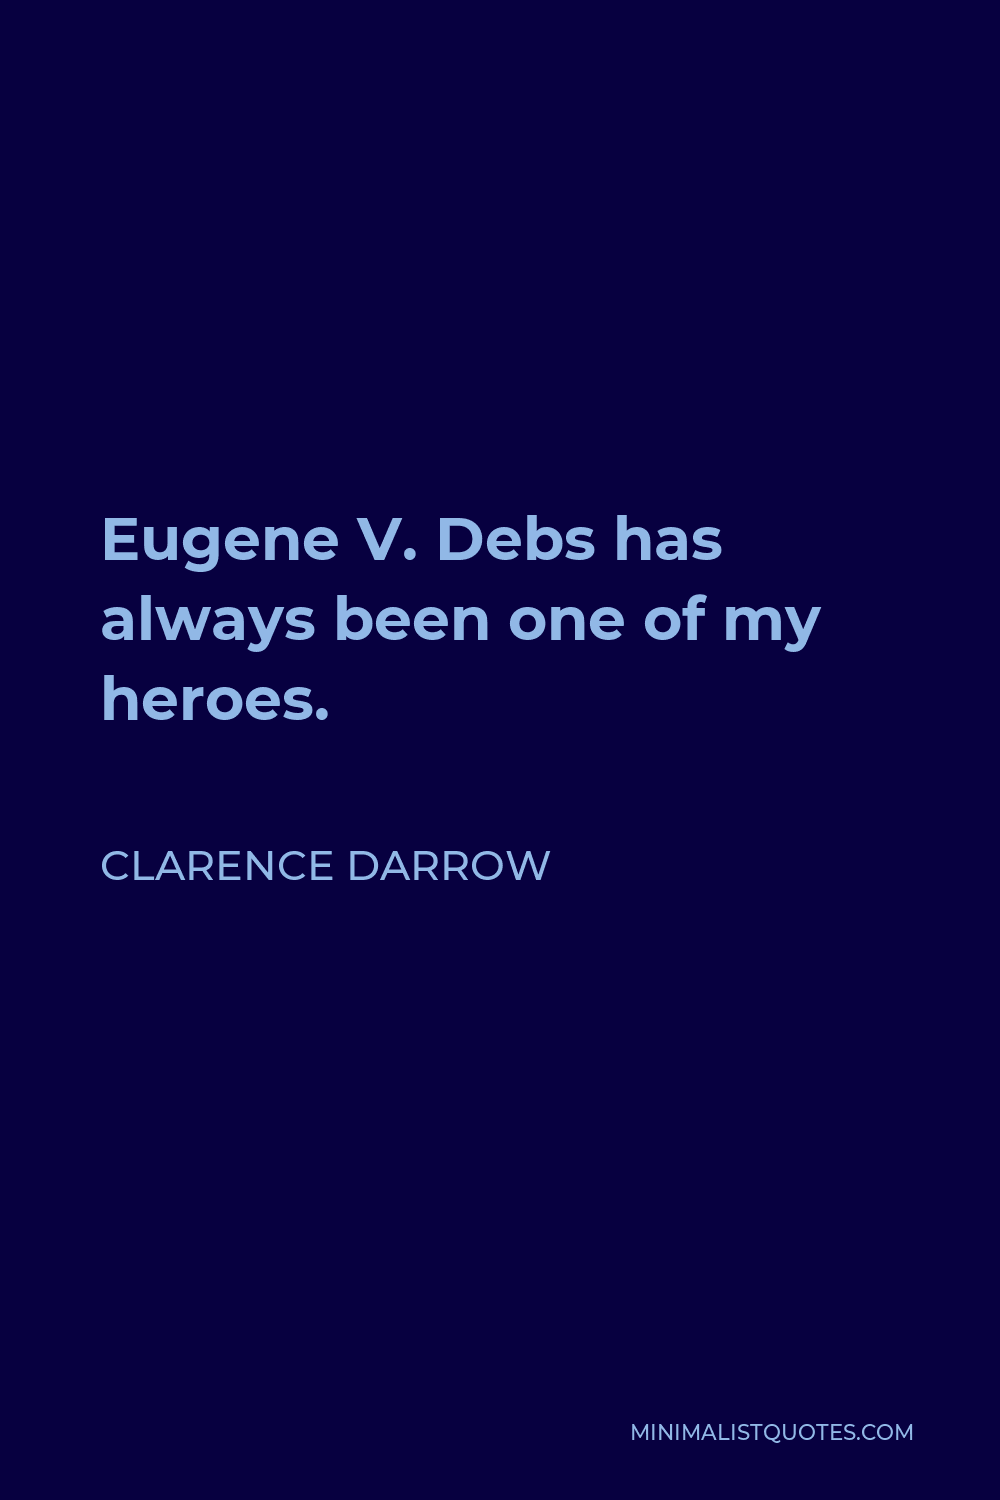 Clarence Darrow Quote - Eugene V. Debs has always been one of my heroes.